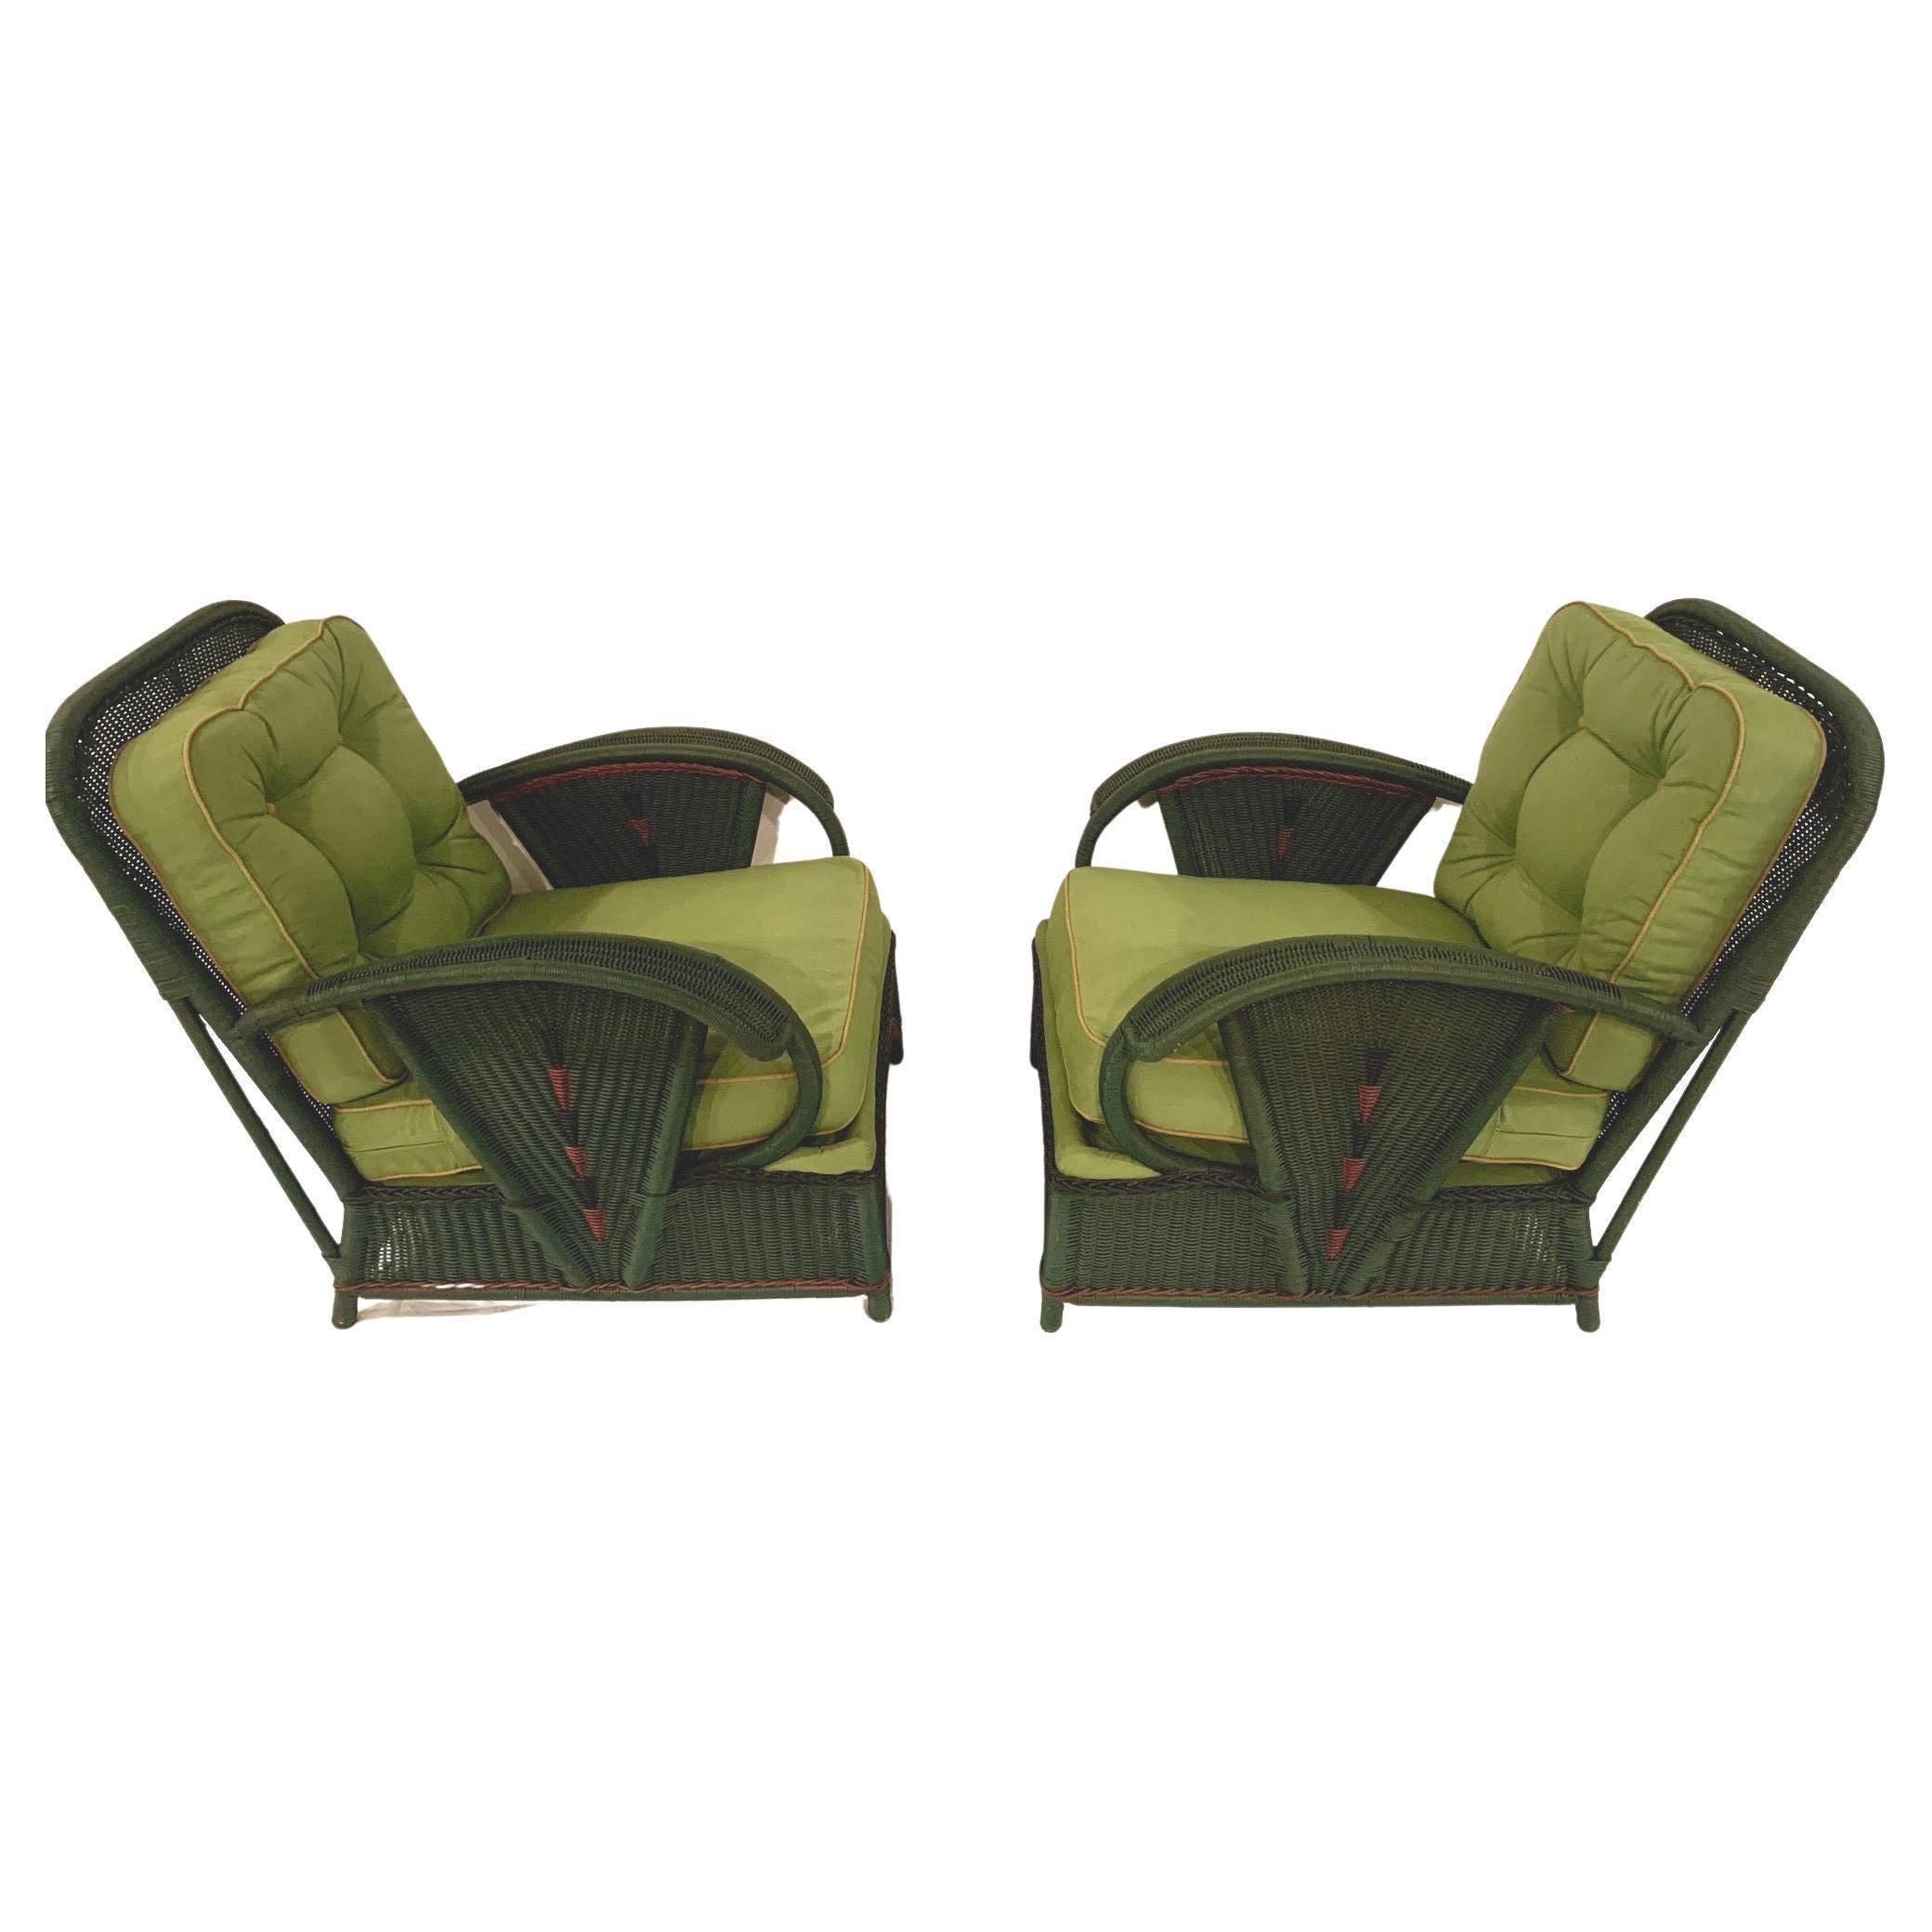 Early 20th Century Pair of Green Antique Wicker Art Deco Lounge Chairs with Decorative Trim For Sale